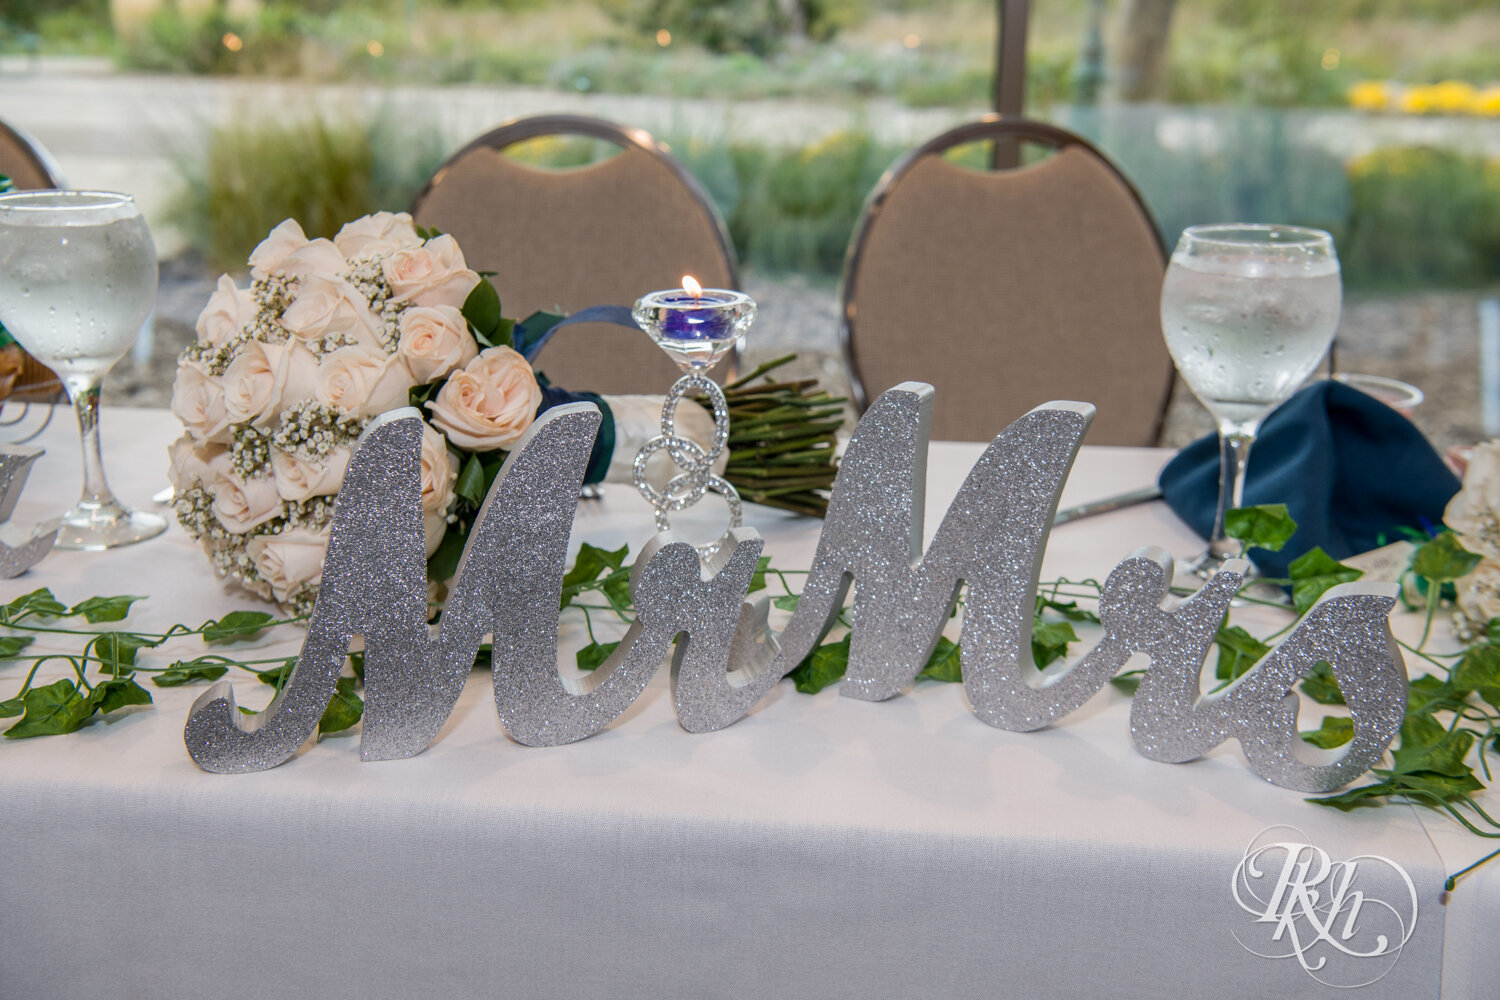 Wedding reception with green and blue accents at Eagan Community Center in Eagan, Minnesota.